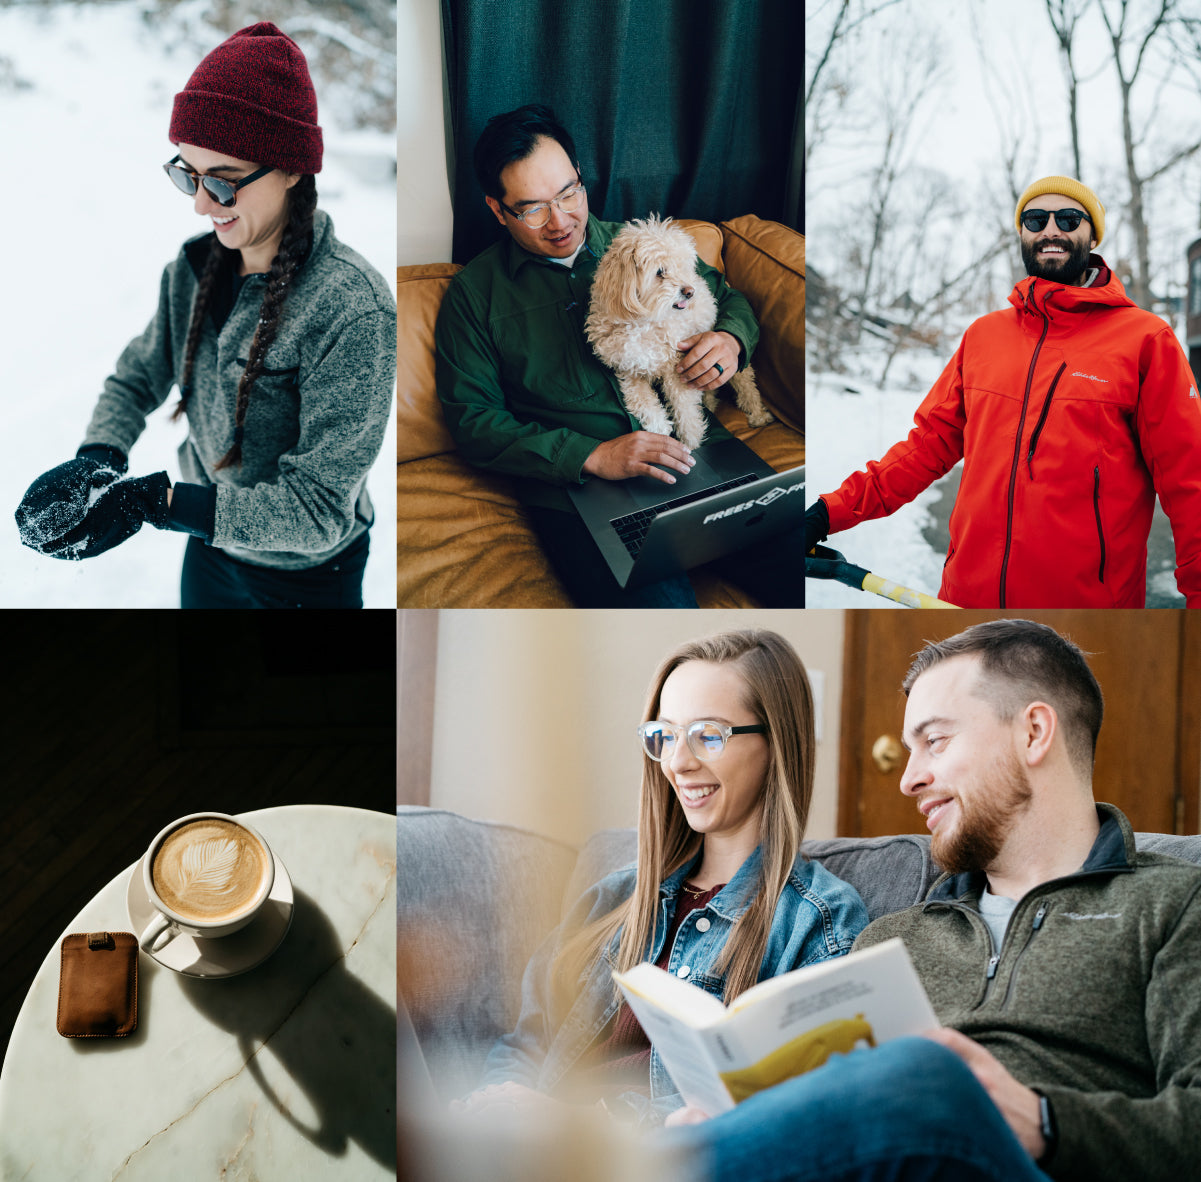 Photos of people keeping cozy with friends and pets during the snowy winter